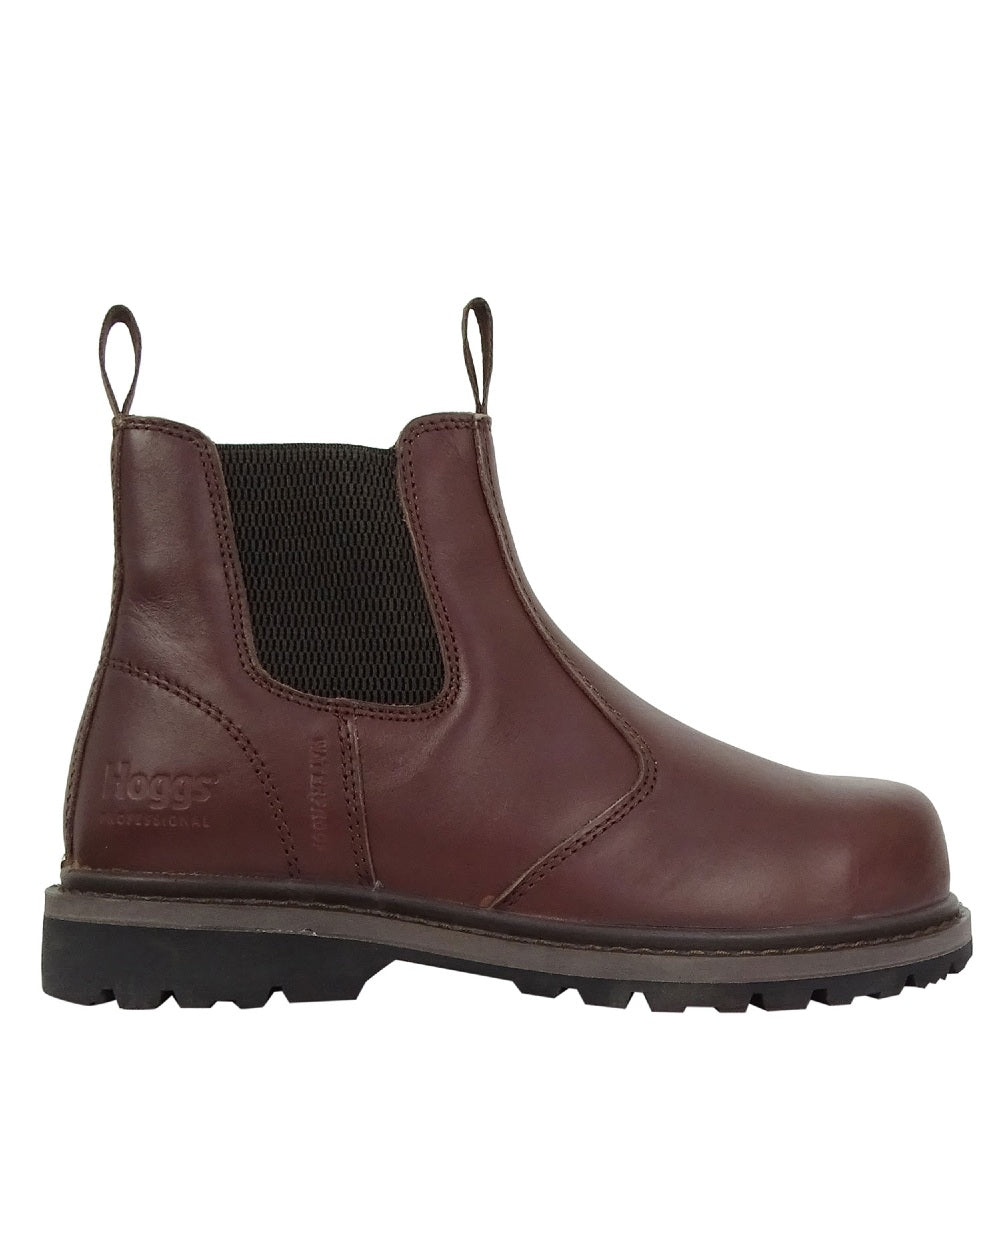 Hoggs of Fife Zeus Safety Dealer Boots in Brown 